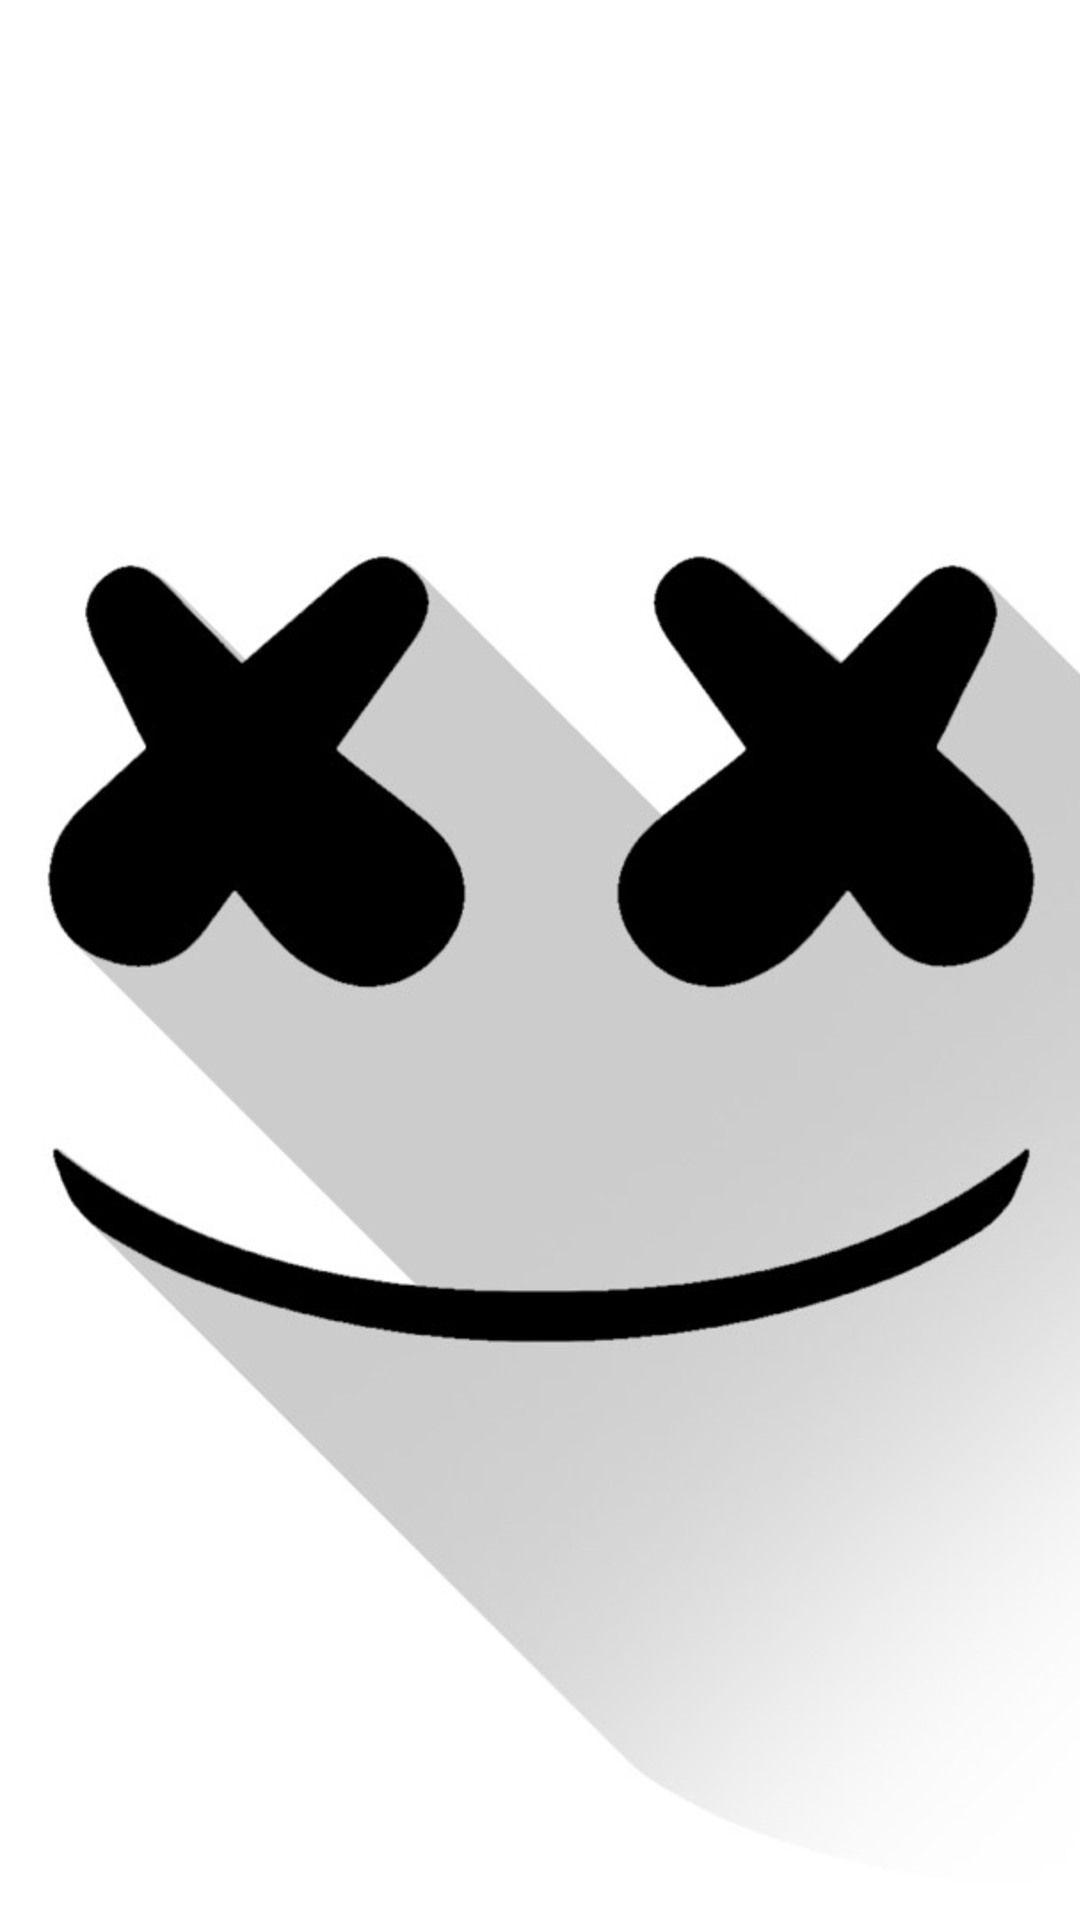 Dj Marshmello htc one wallpaper, free and easy to download